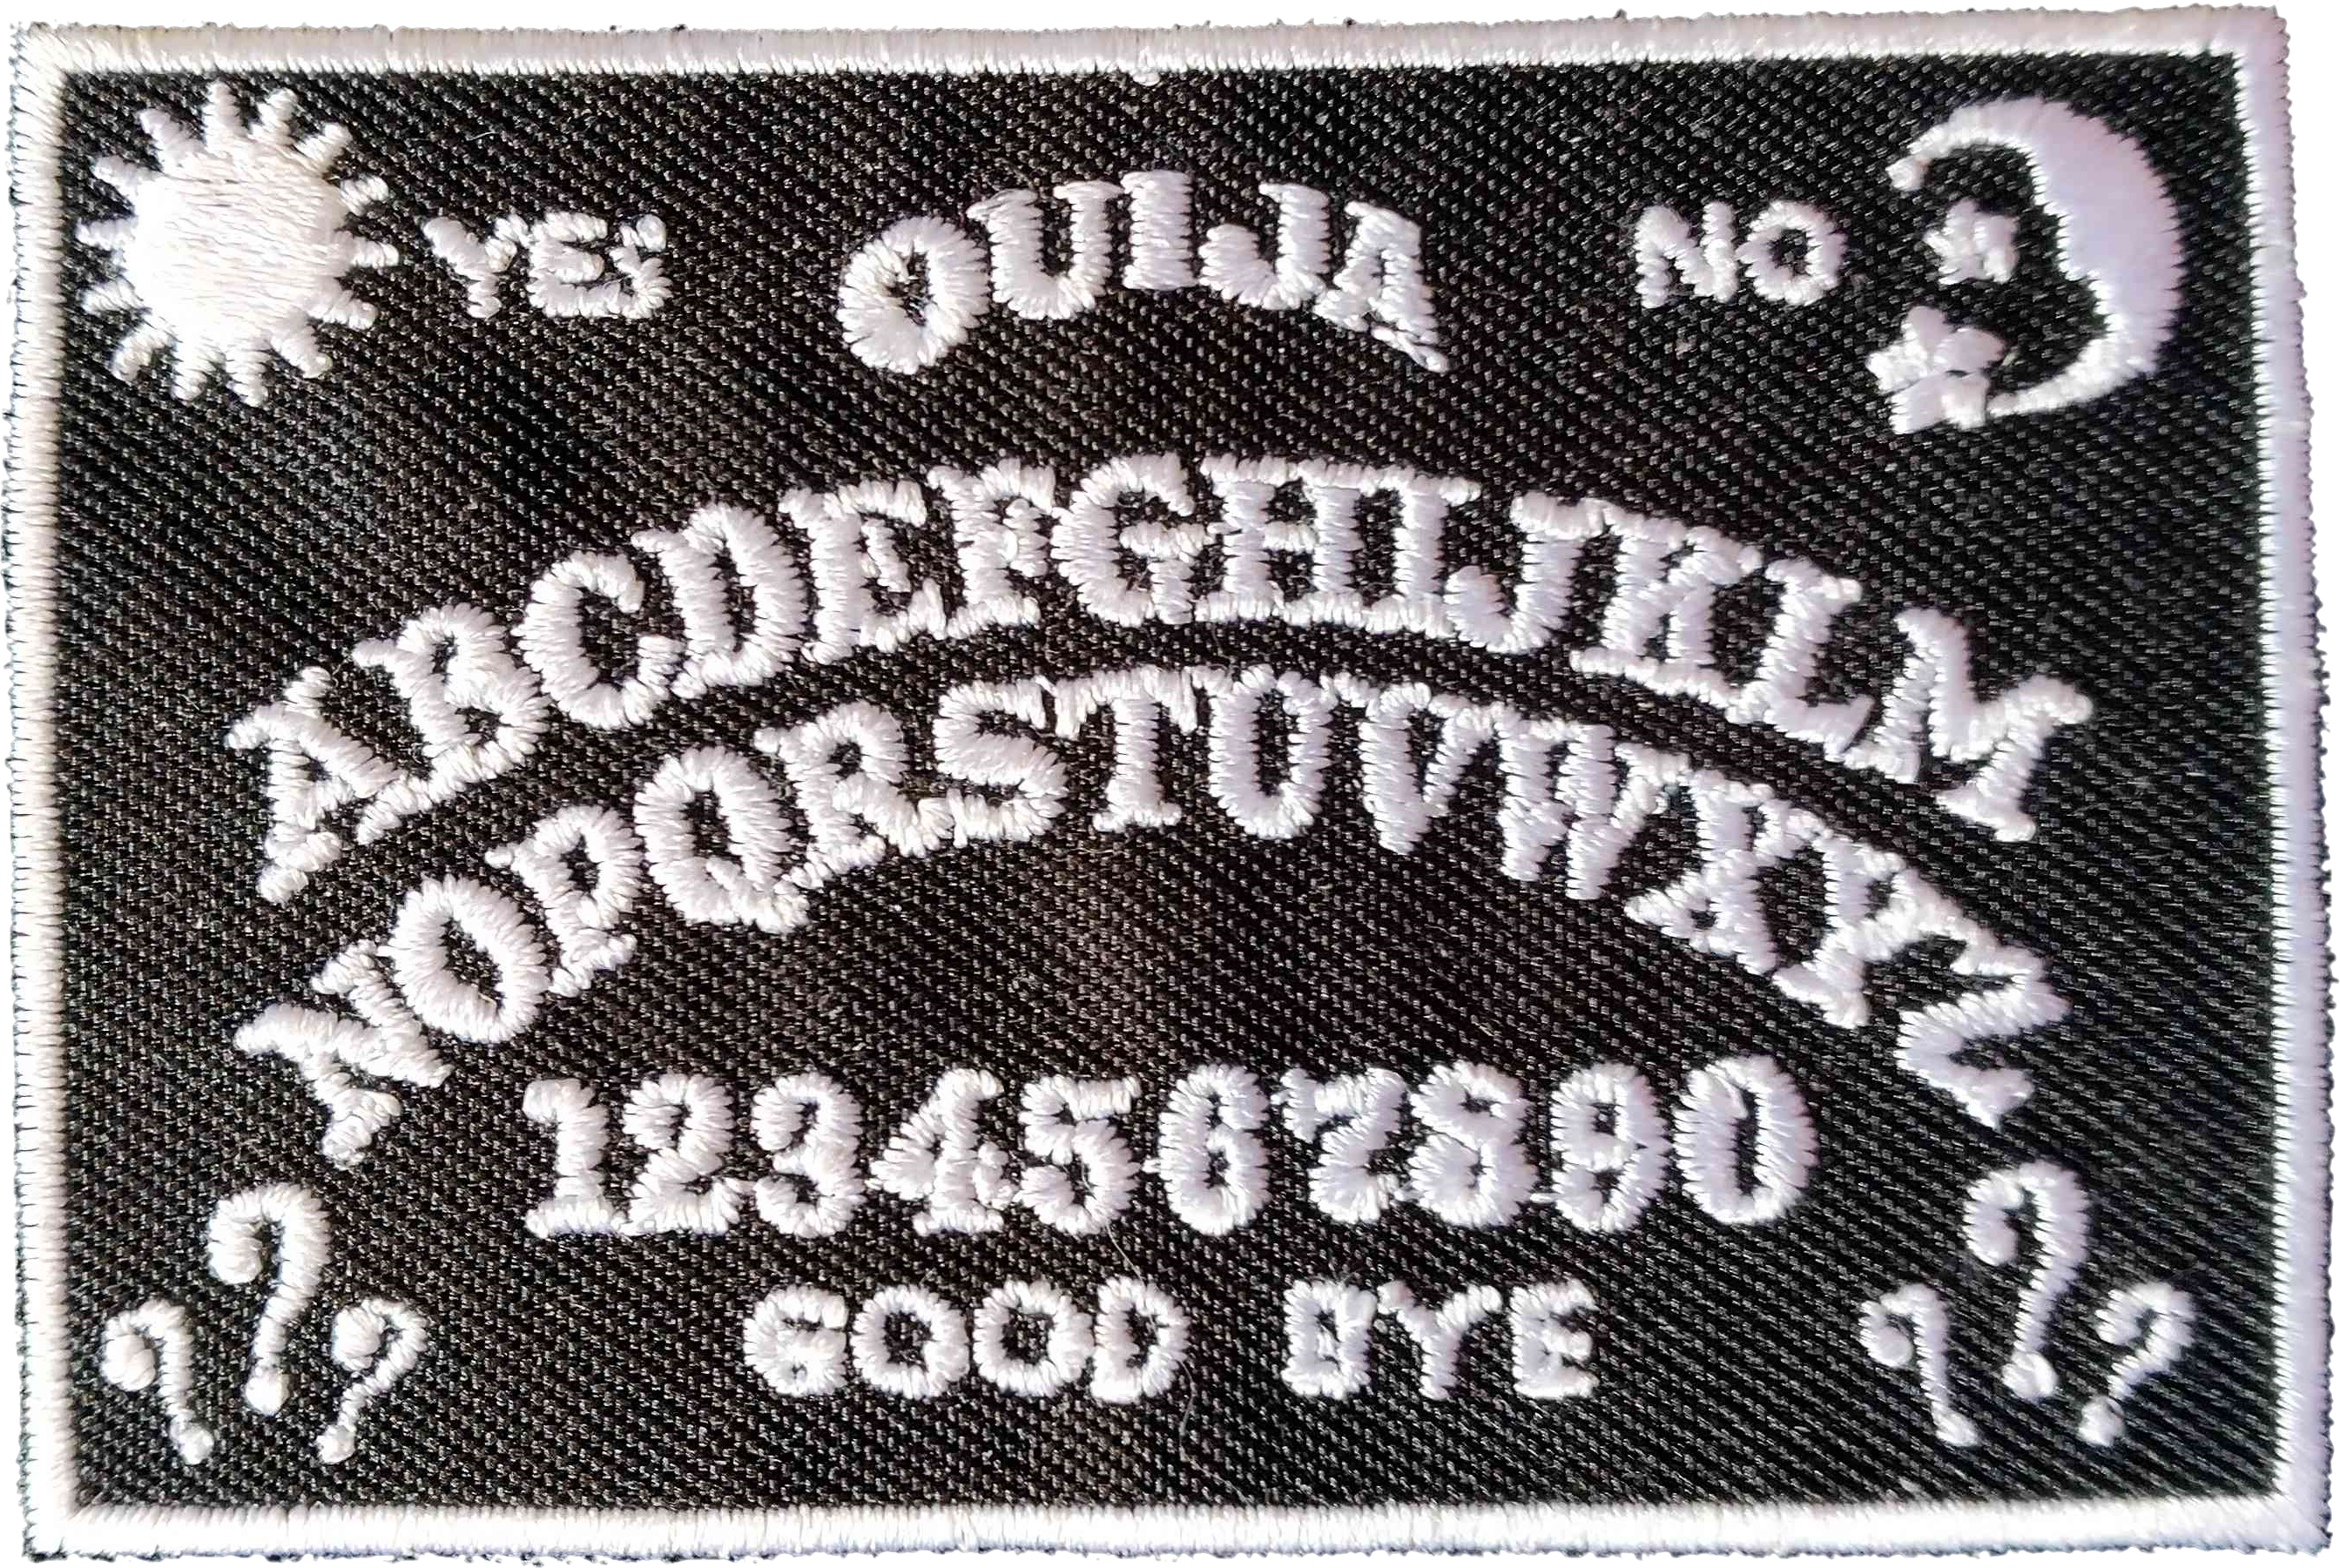 A black and white patch of an ouija board